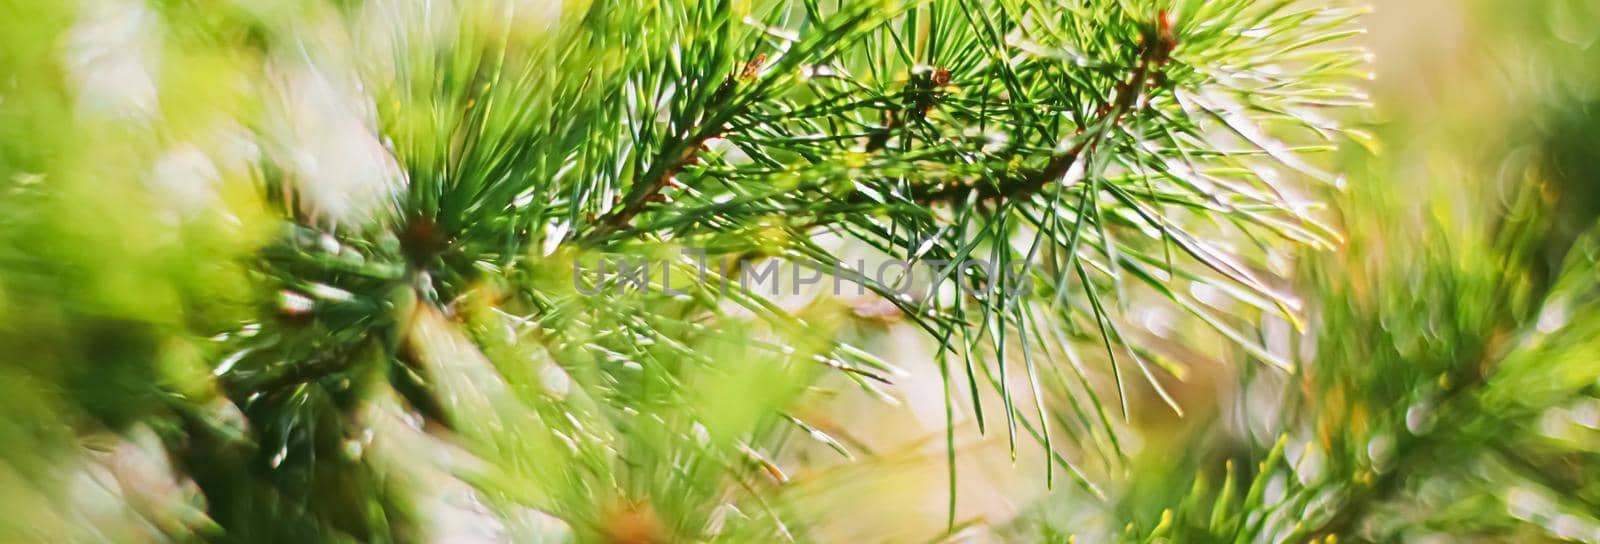 Spruce tree branches as abstract nature background and natural environment concept